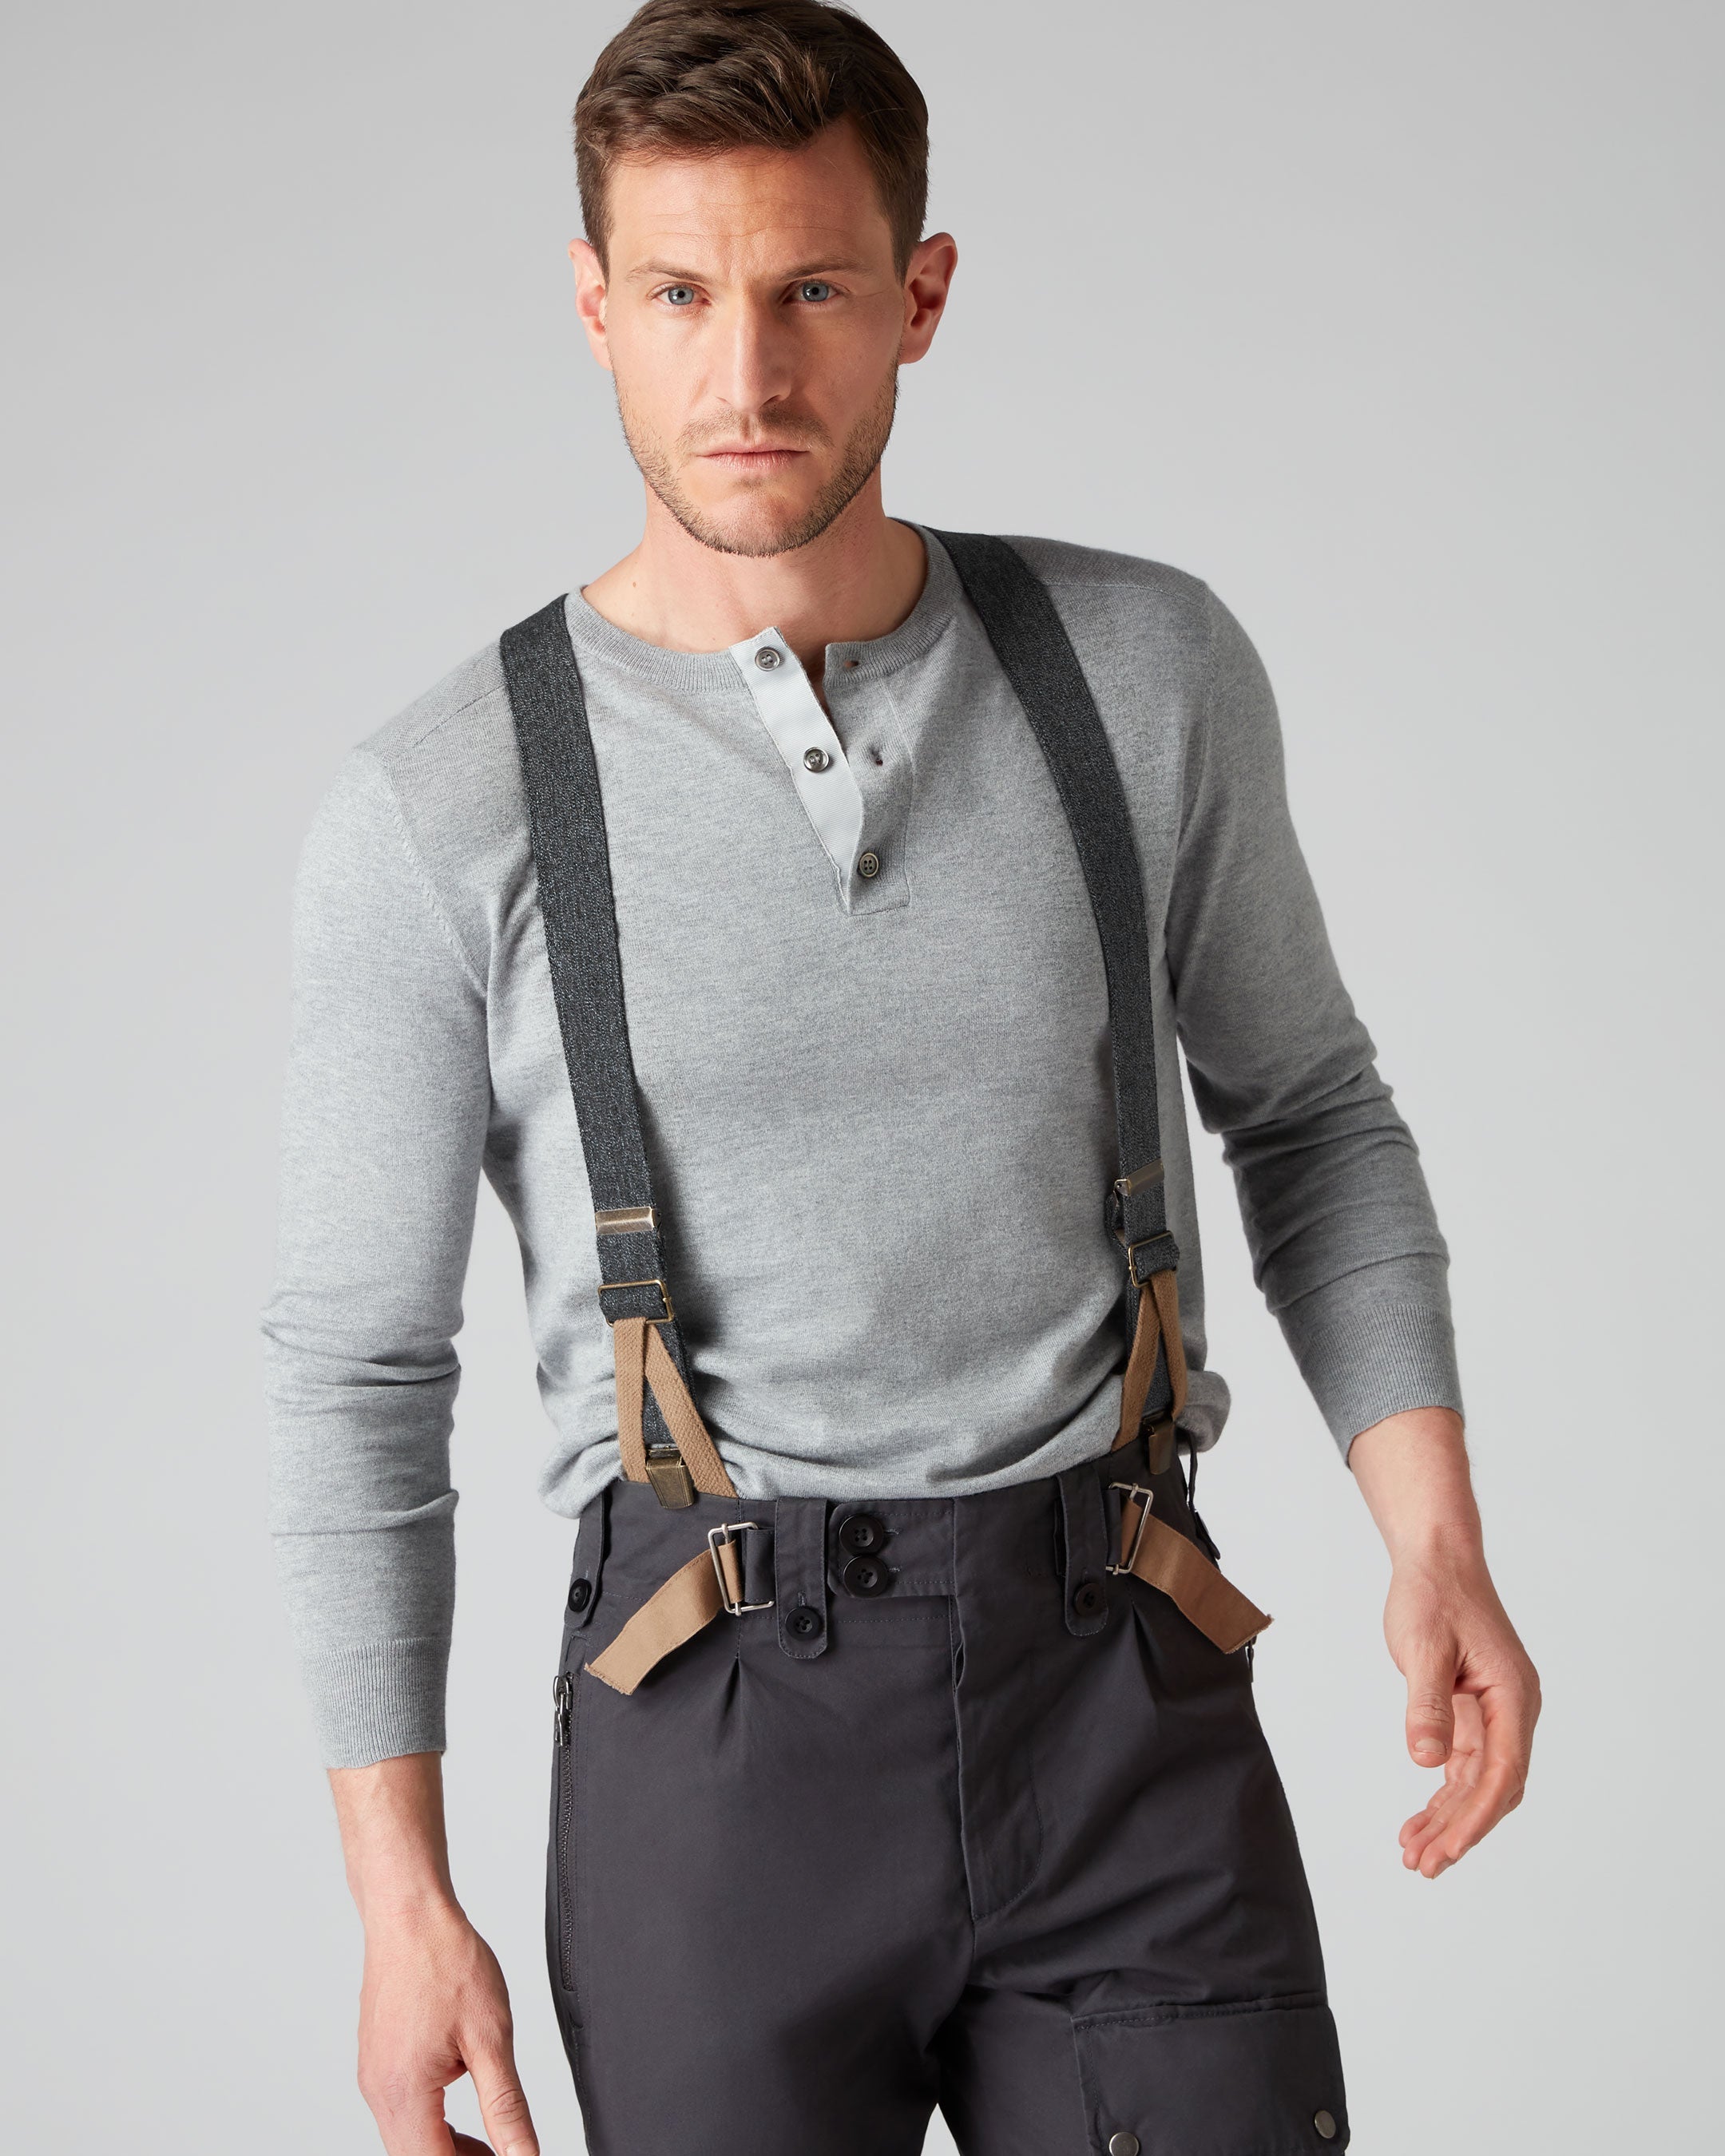 Share 69+ combat trousers with straps super hot